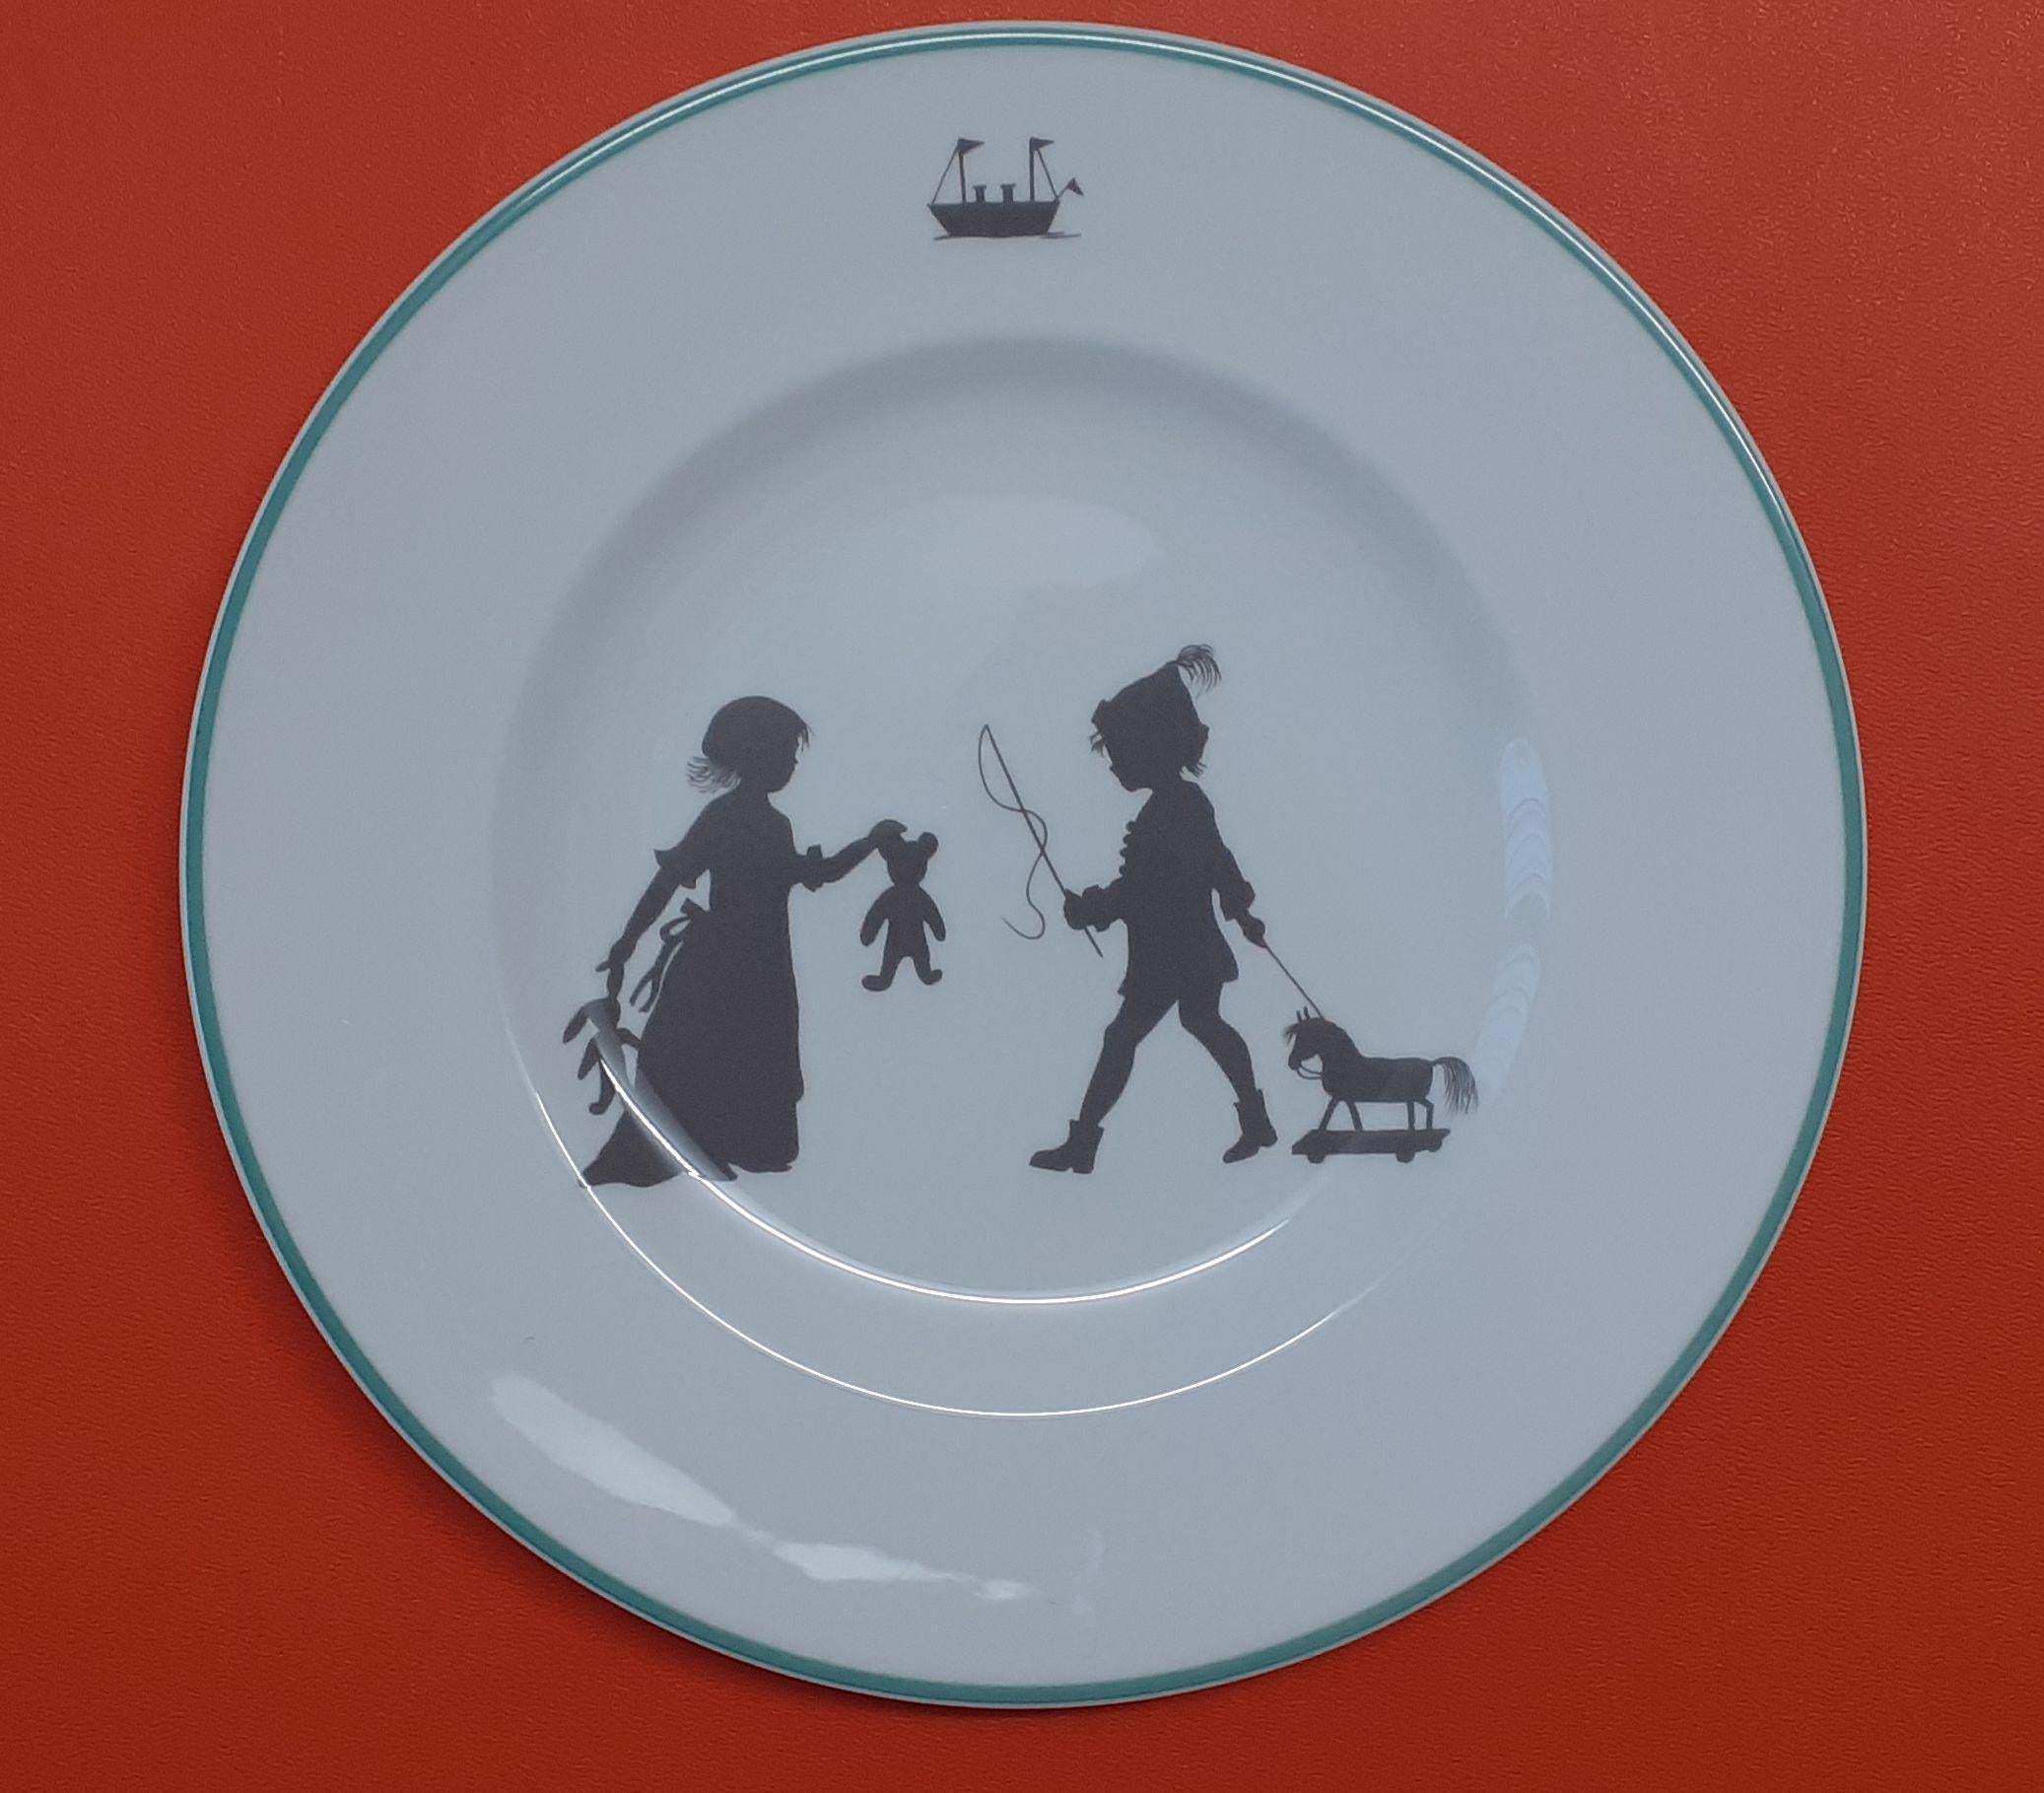 Super Cute Set of 2 Authentic Hermès Plates

From the “SILHOUETTES” collection

Depicting a little girl with a stroller and a cat and a mouse on top, and 2 children with teddy bears and horse on wheels, boat on top

Made of Porcelain Fine Bone China